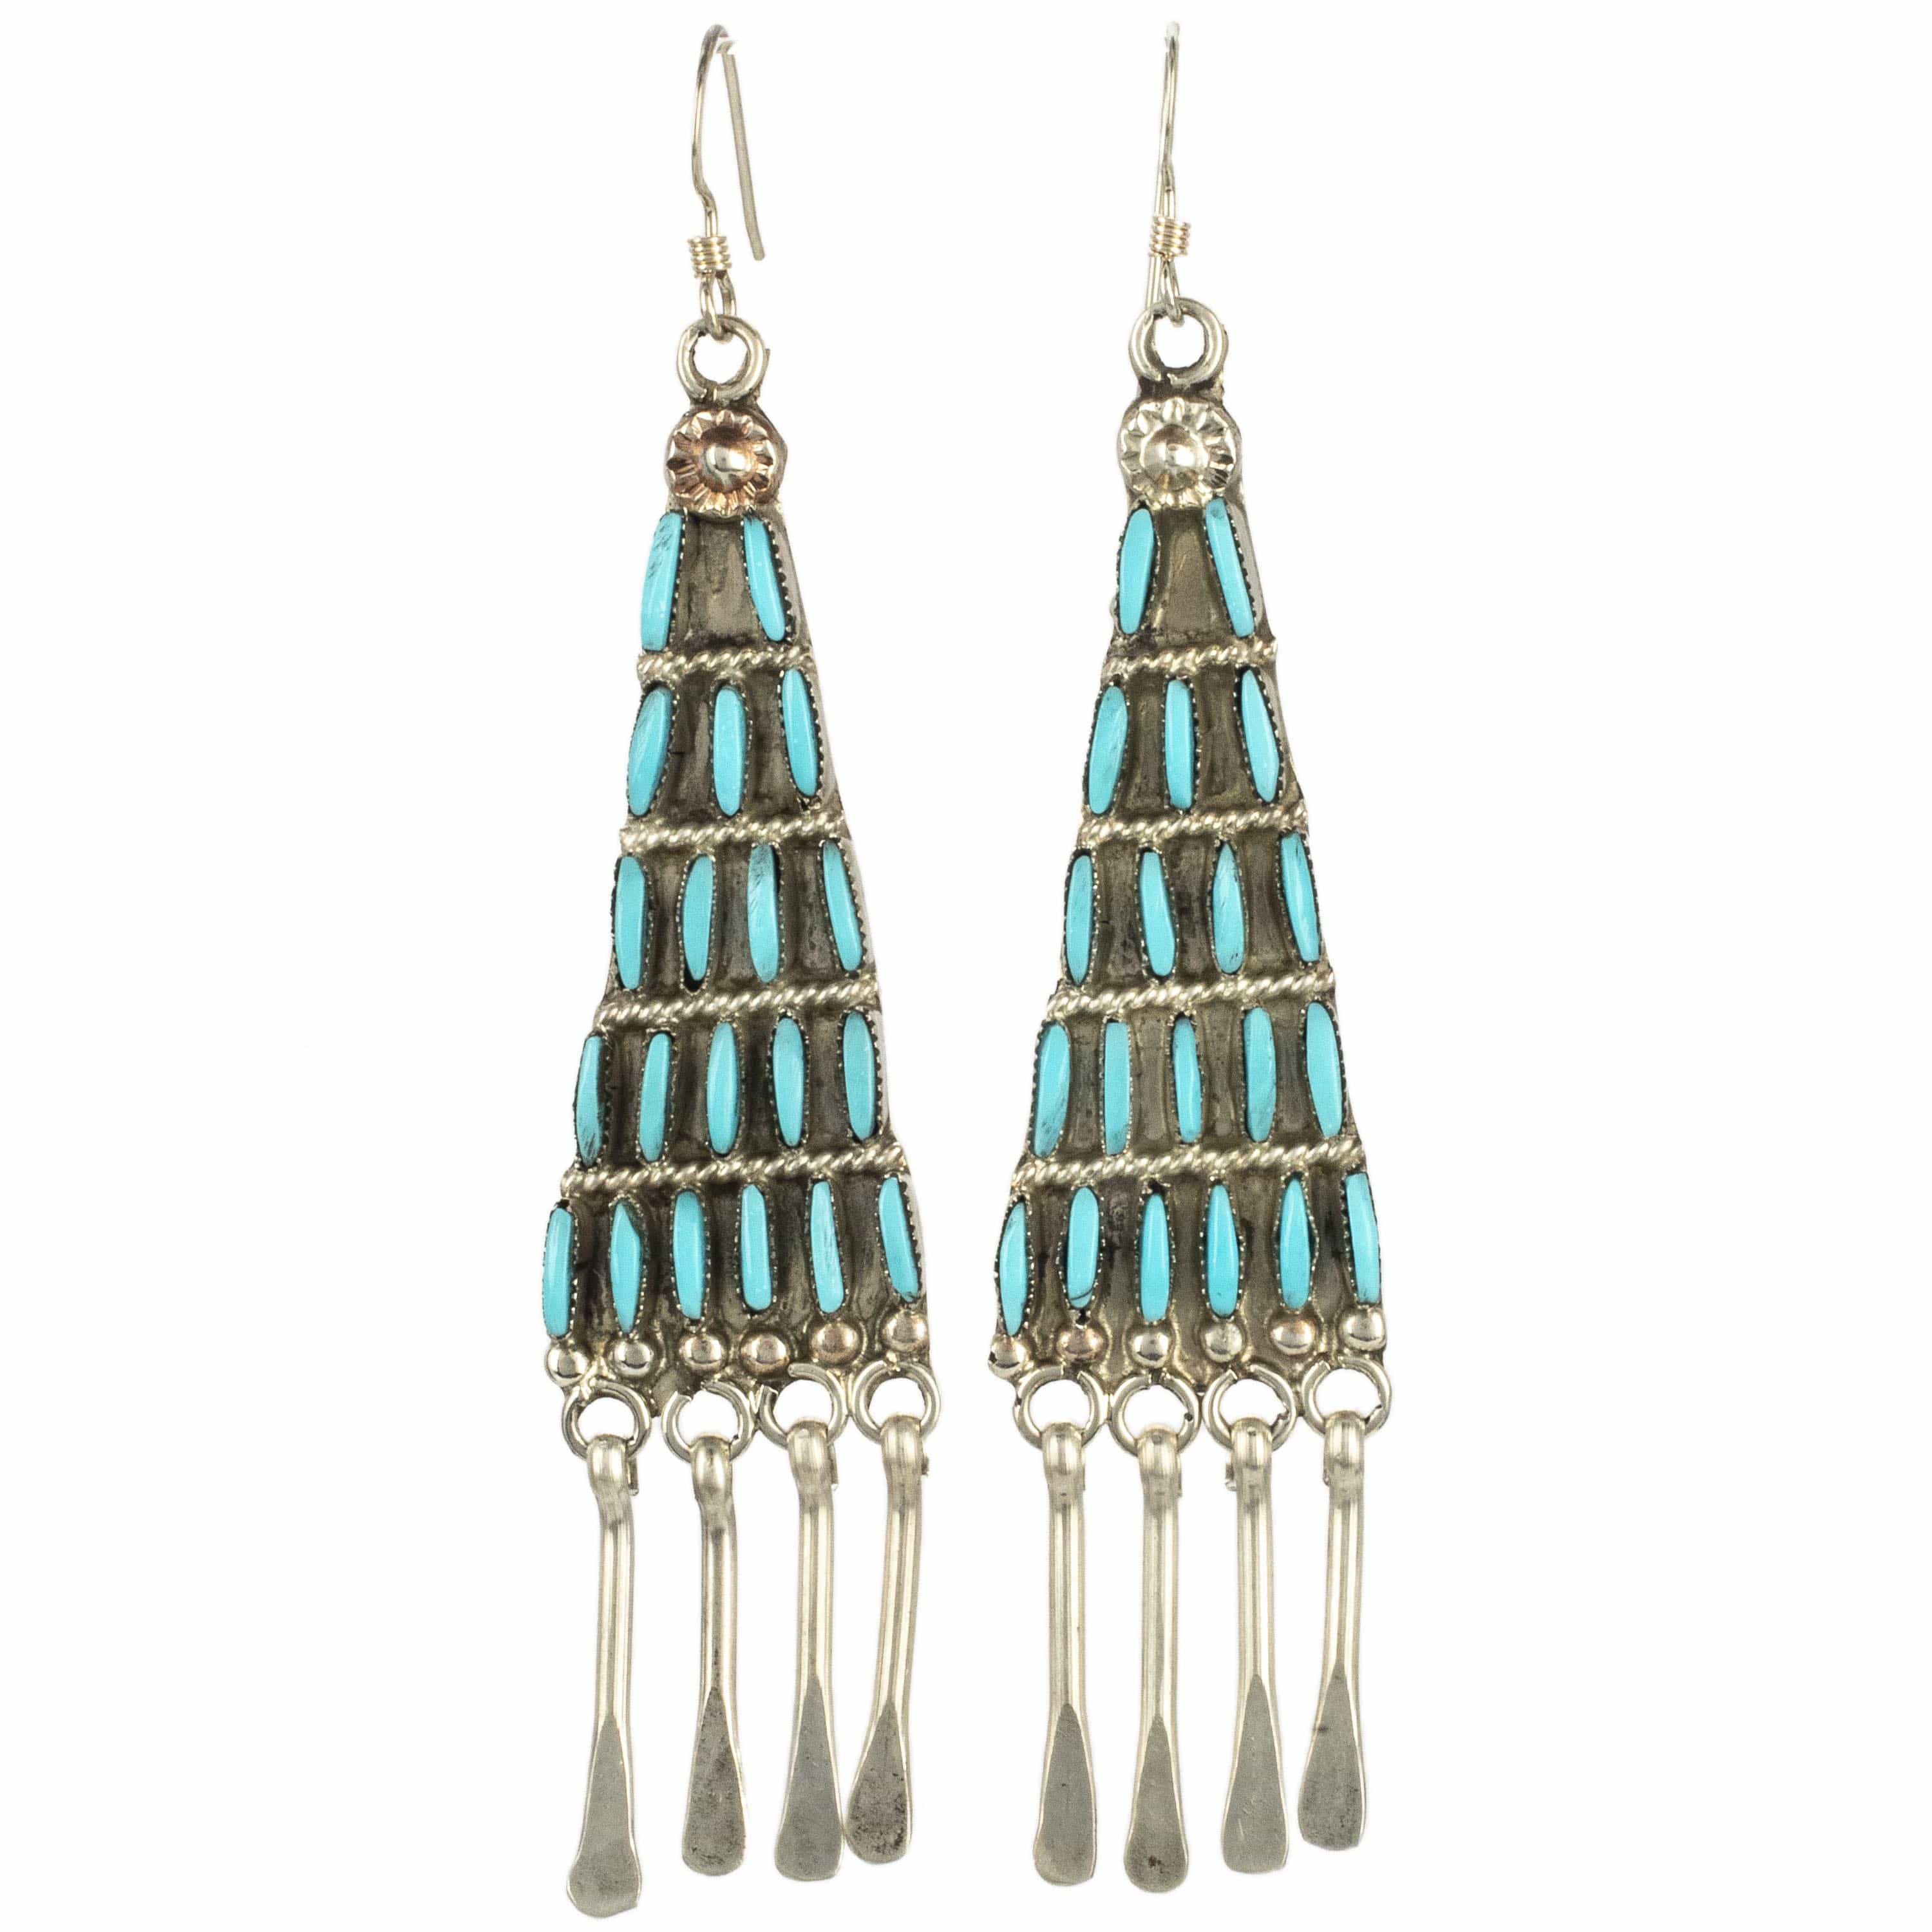 Kalifano Native American Jewelry Kingman Turquoise Zuni Needle Point Triangle Dangly USA Native American Made Sterling Silver Earrings NAE1100.004